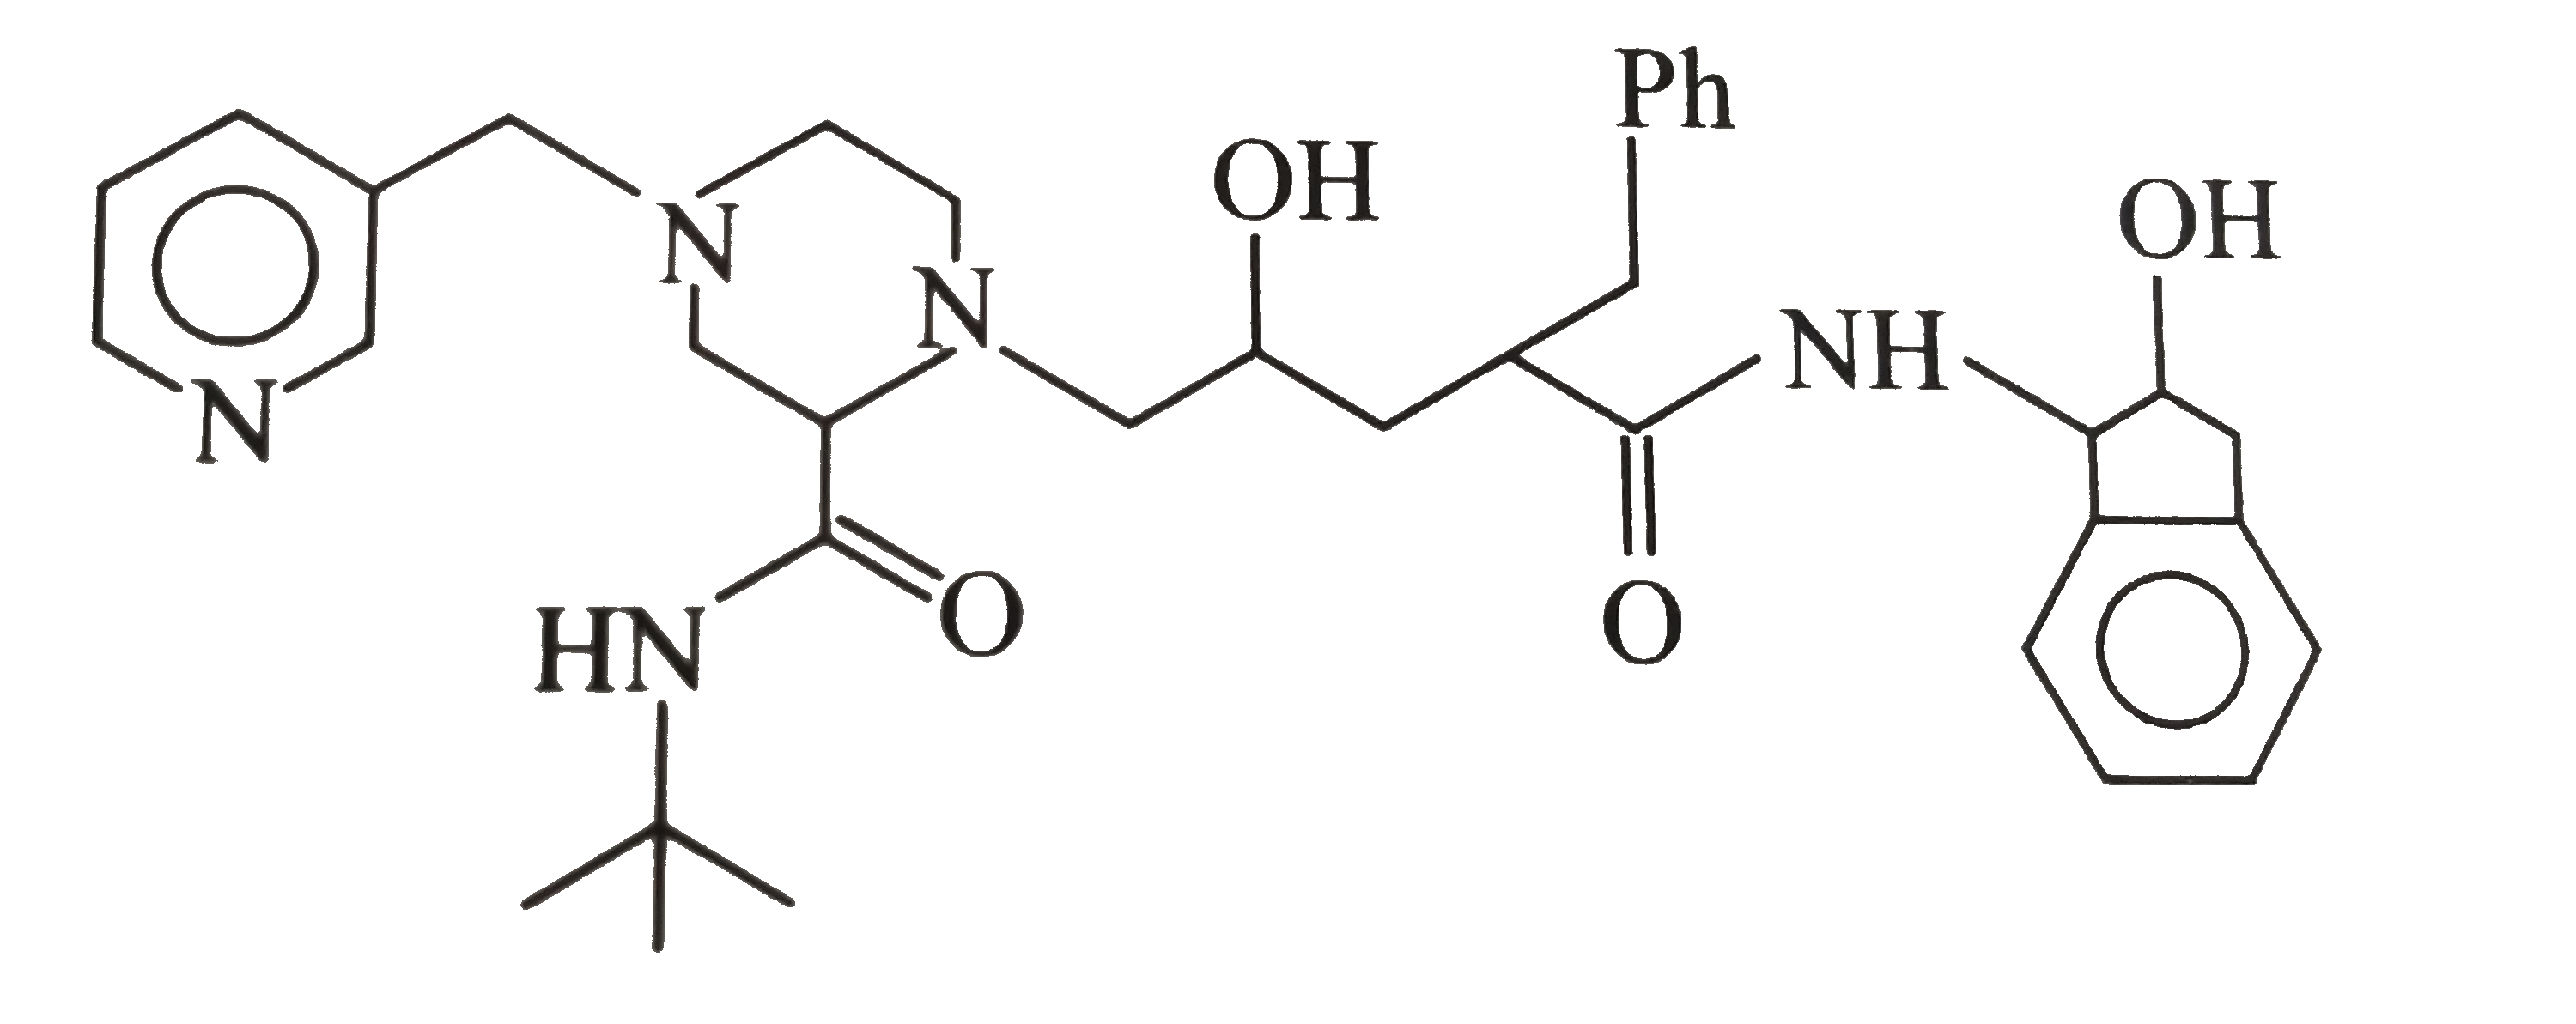 Crixivan, a drug produced by Merck and Co., is widely used in the fight against AIDS (acquired immune deficiency syndrome). The structure of crixivan is given below:      How many amide groups are present in the compound?